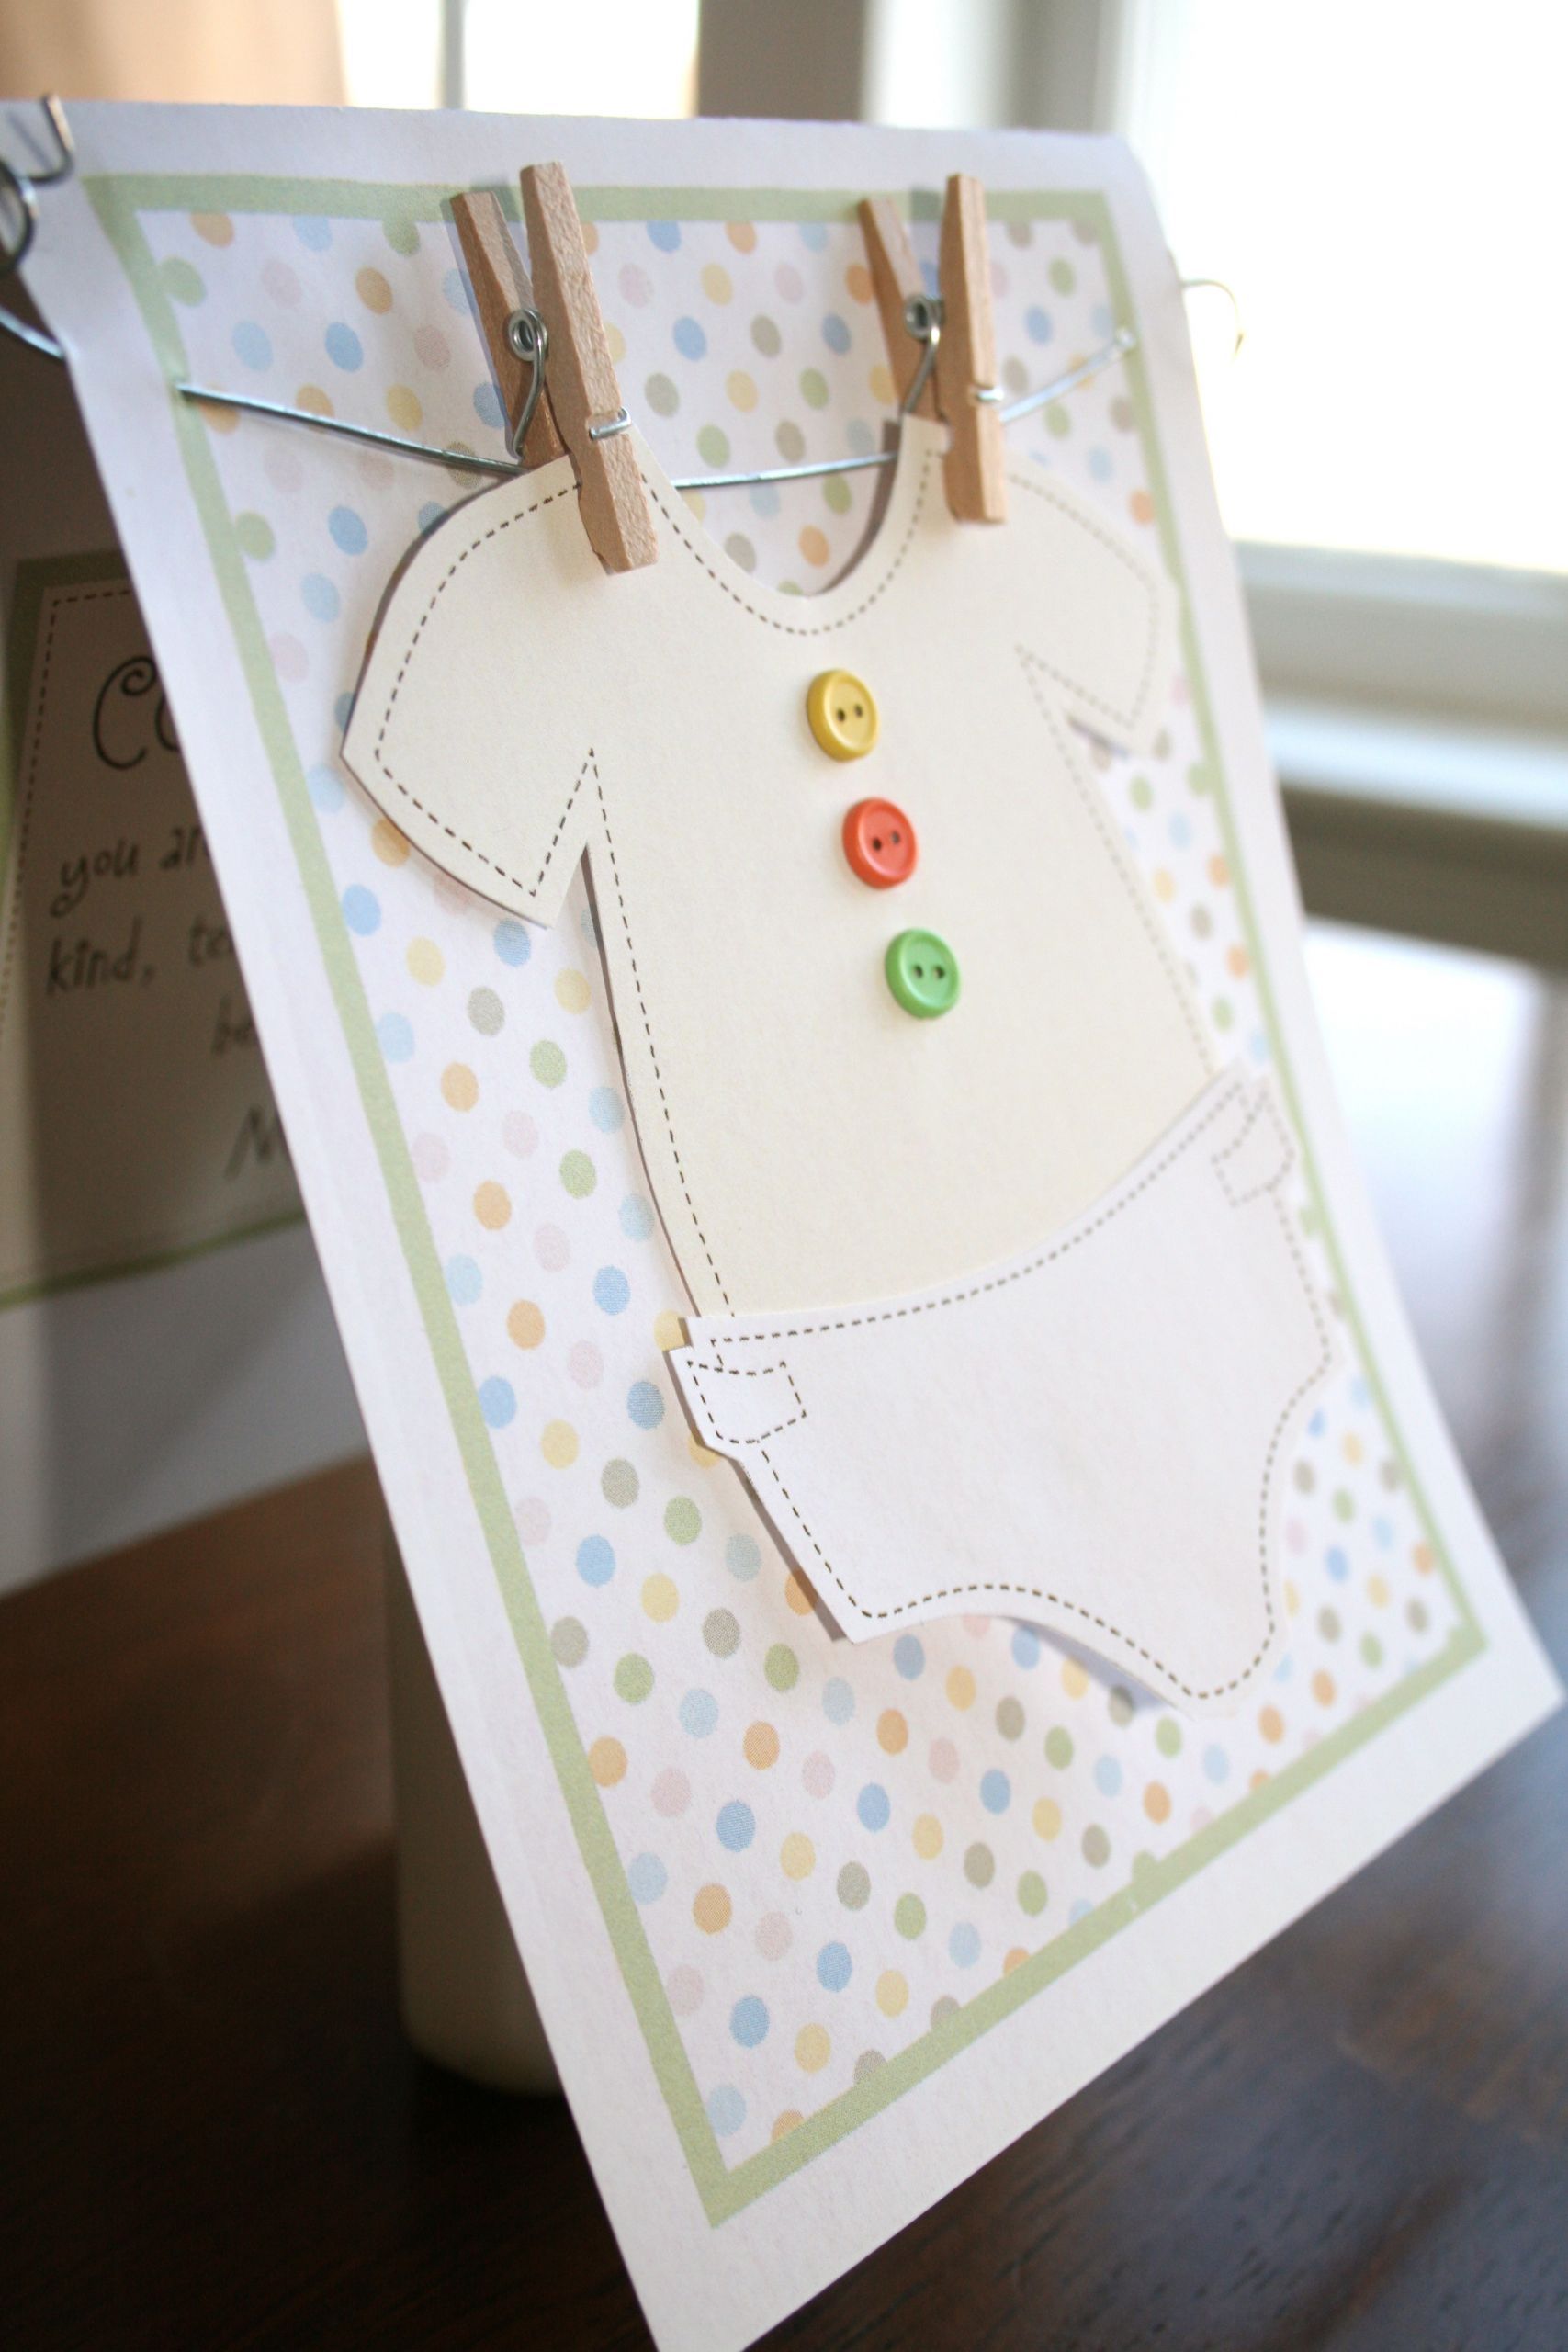 DIY Baby Shower Card
 Oh Baby Free DIY Baby Shower Card Download